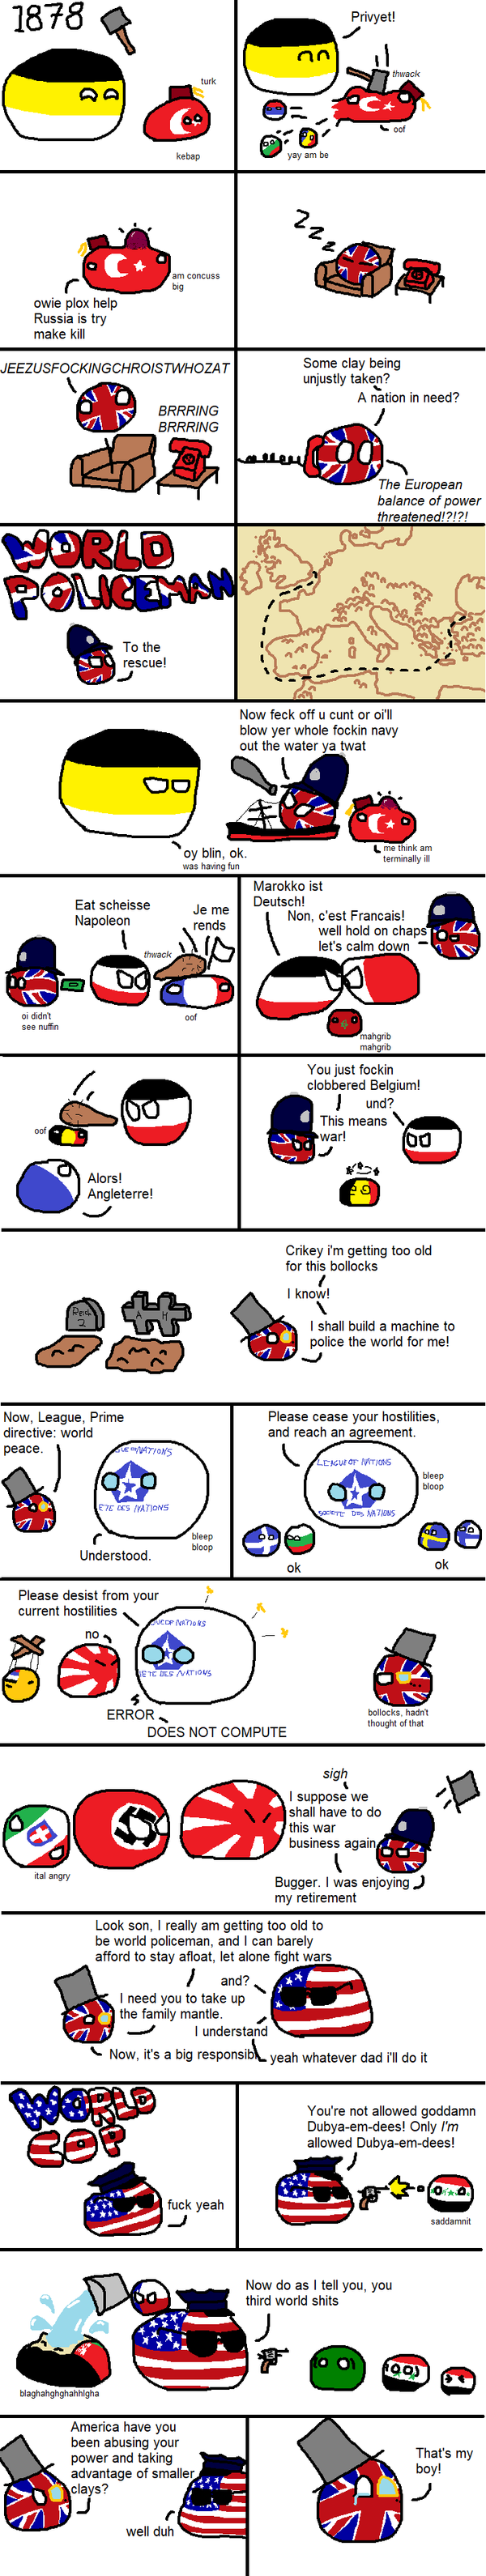 0_1532285799233_CountryBall20072018064245.png